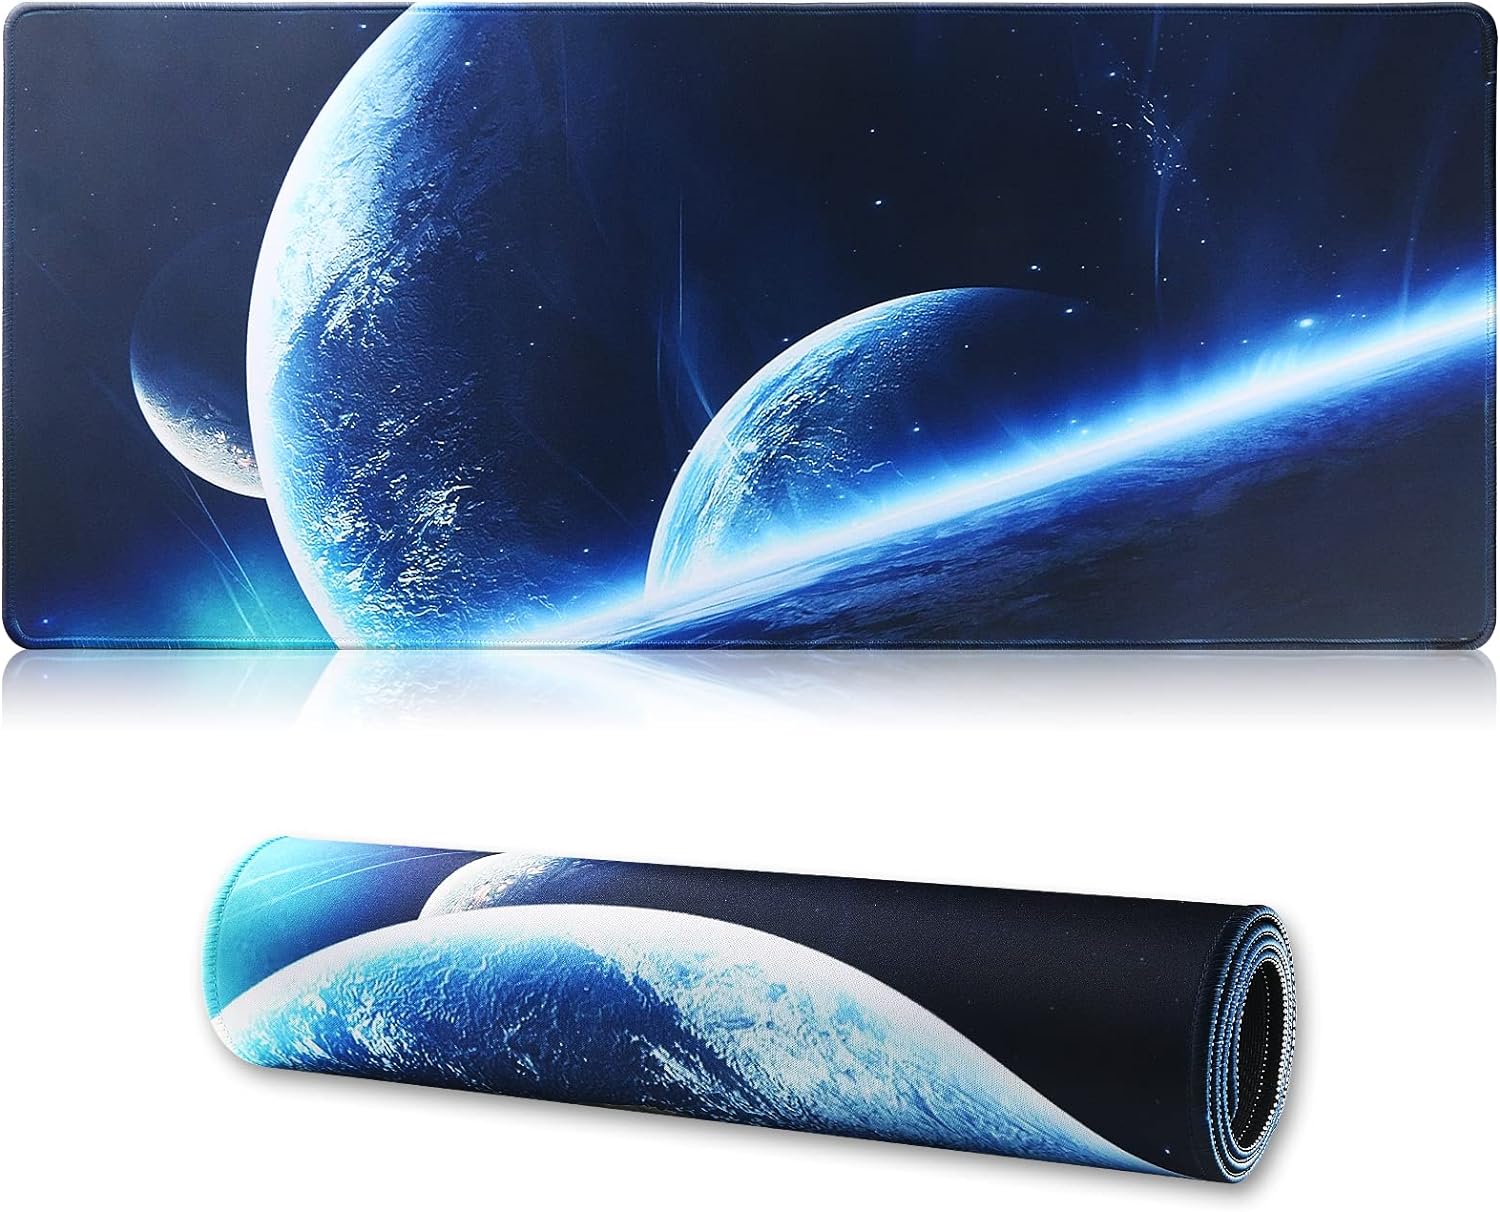 Jahosin Large Gaming Mouse Pad with Stitched Edges,[27.5x11.8In] Extended Mouse Pad with Non-Slip Natural Rubber Base for Gamer/Desktop/Office/Home (70x30 Spaceball)